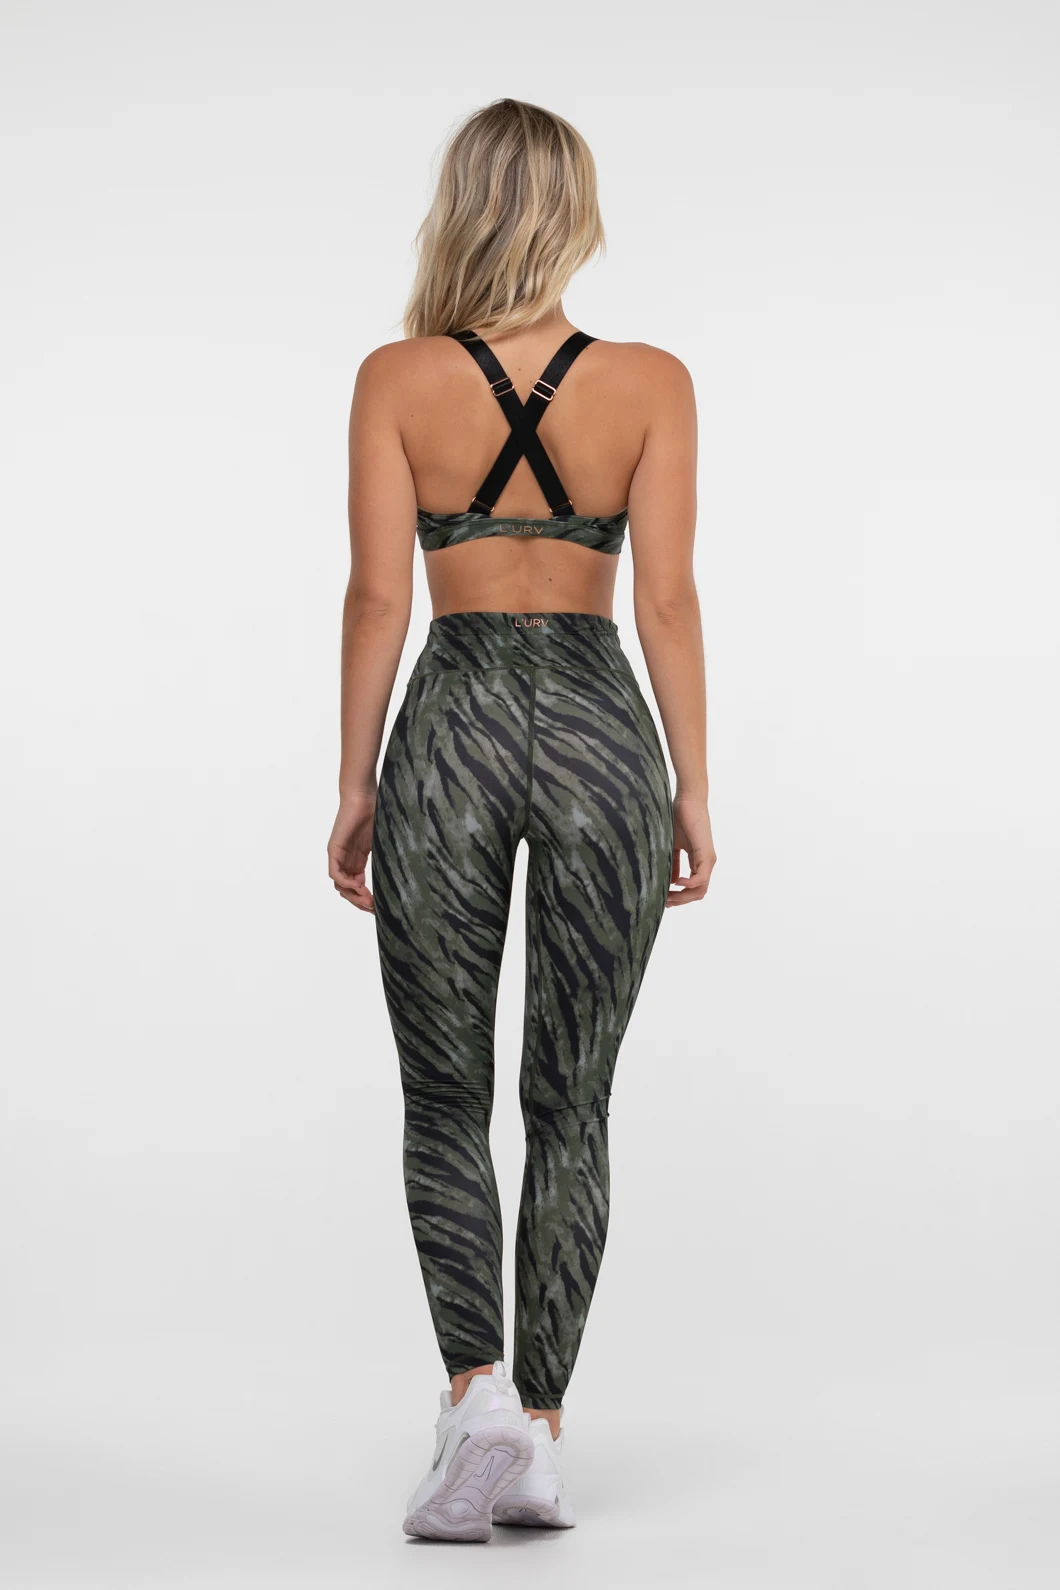 Into the woods leggings